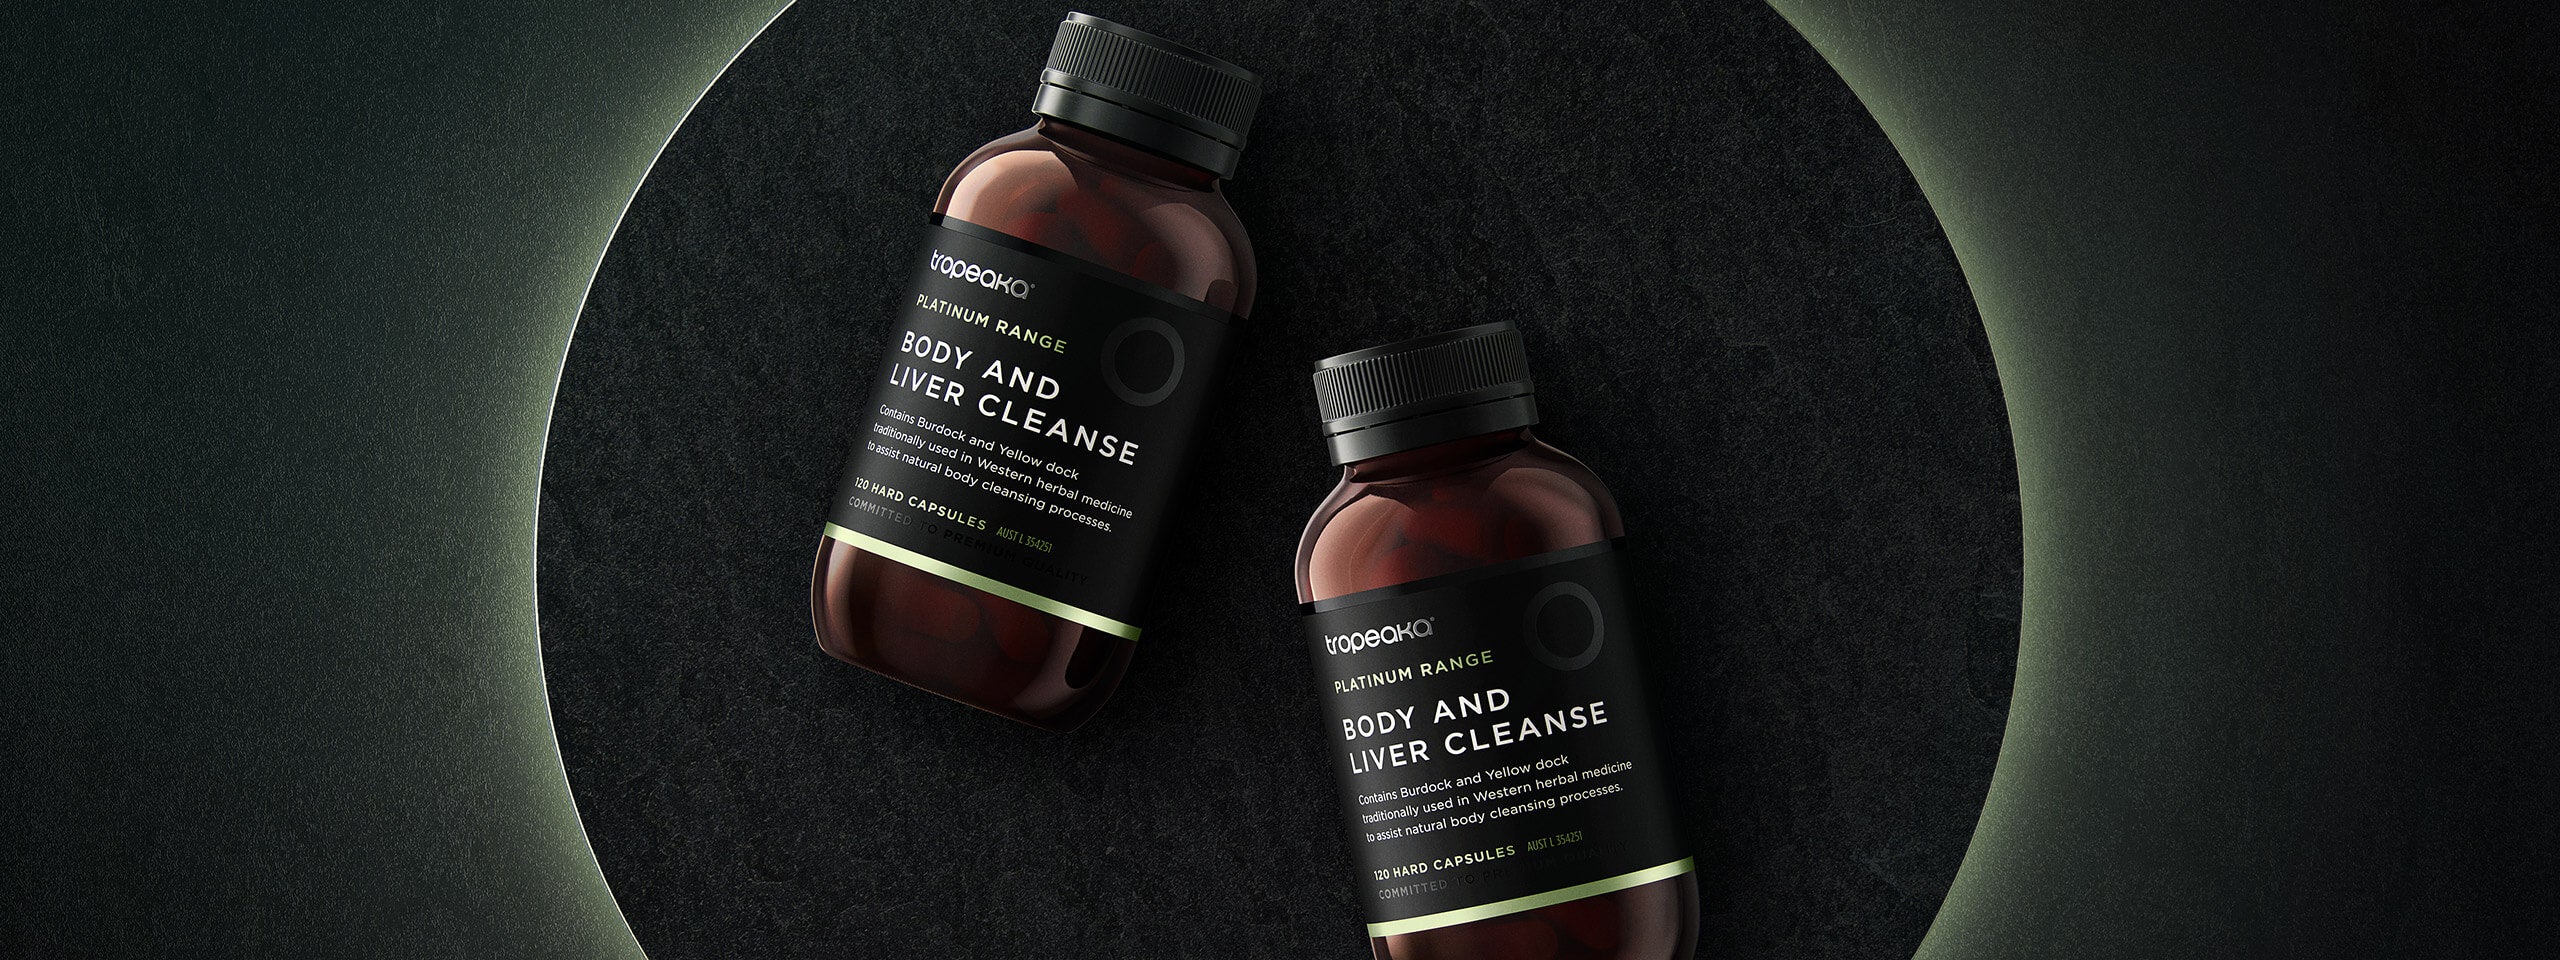 BODY AND LIVER CLEANSE